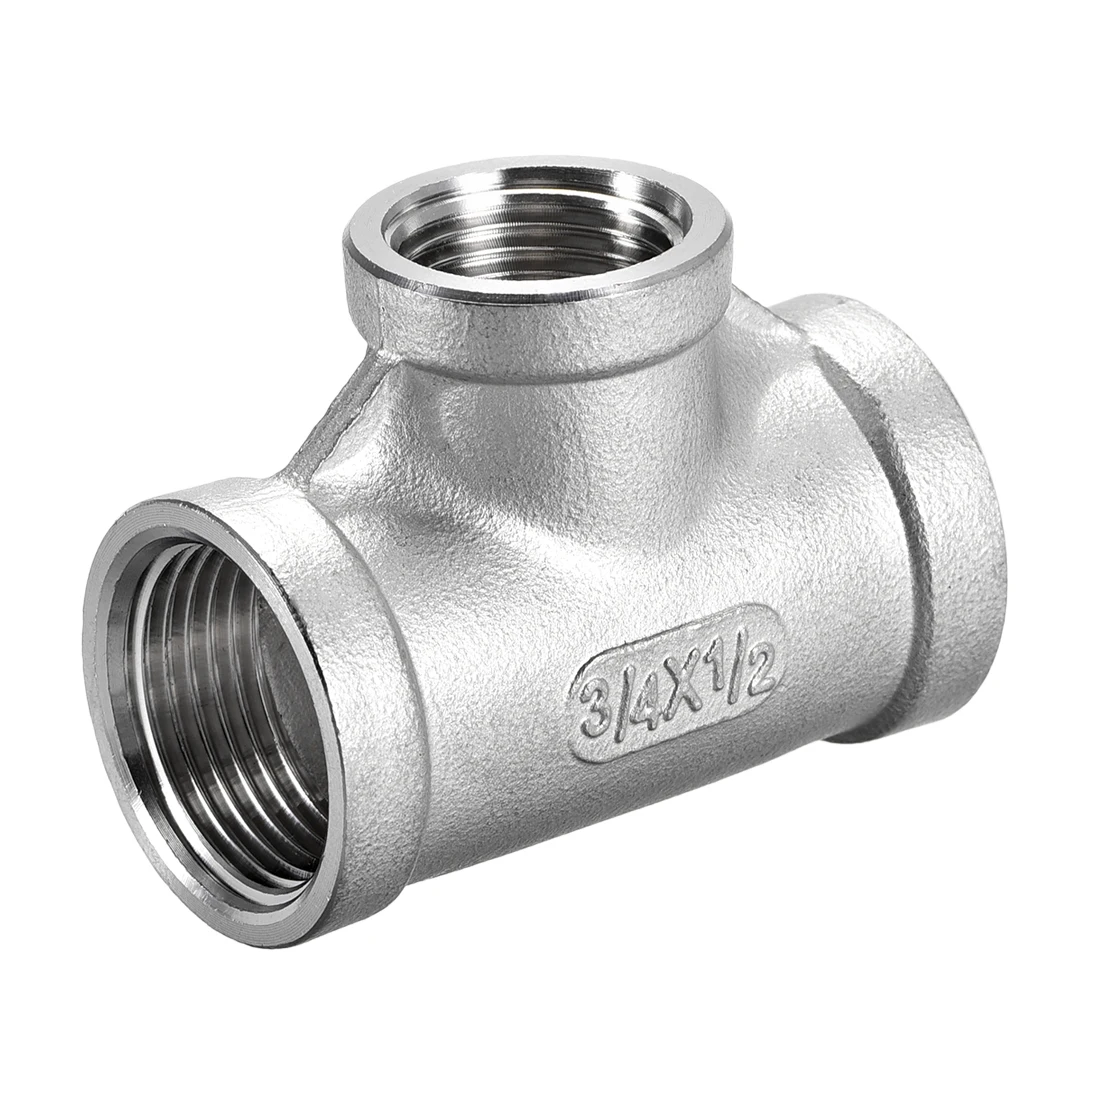 

uxcell Stainless Steel 304 Cast Pipe Fitting 3/4 BSPT x 1/2 BSPT x 3/4 BSPT Female Tee Shaped Connector Coupler